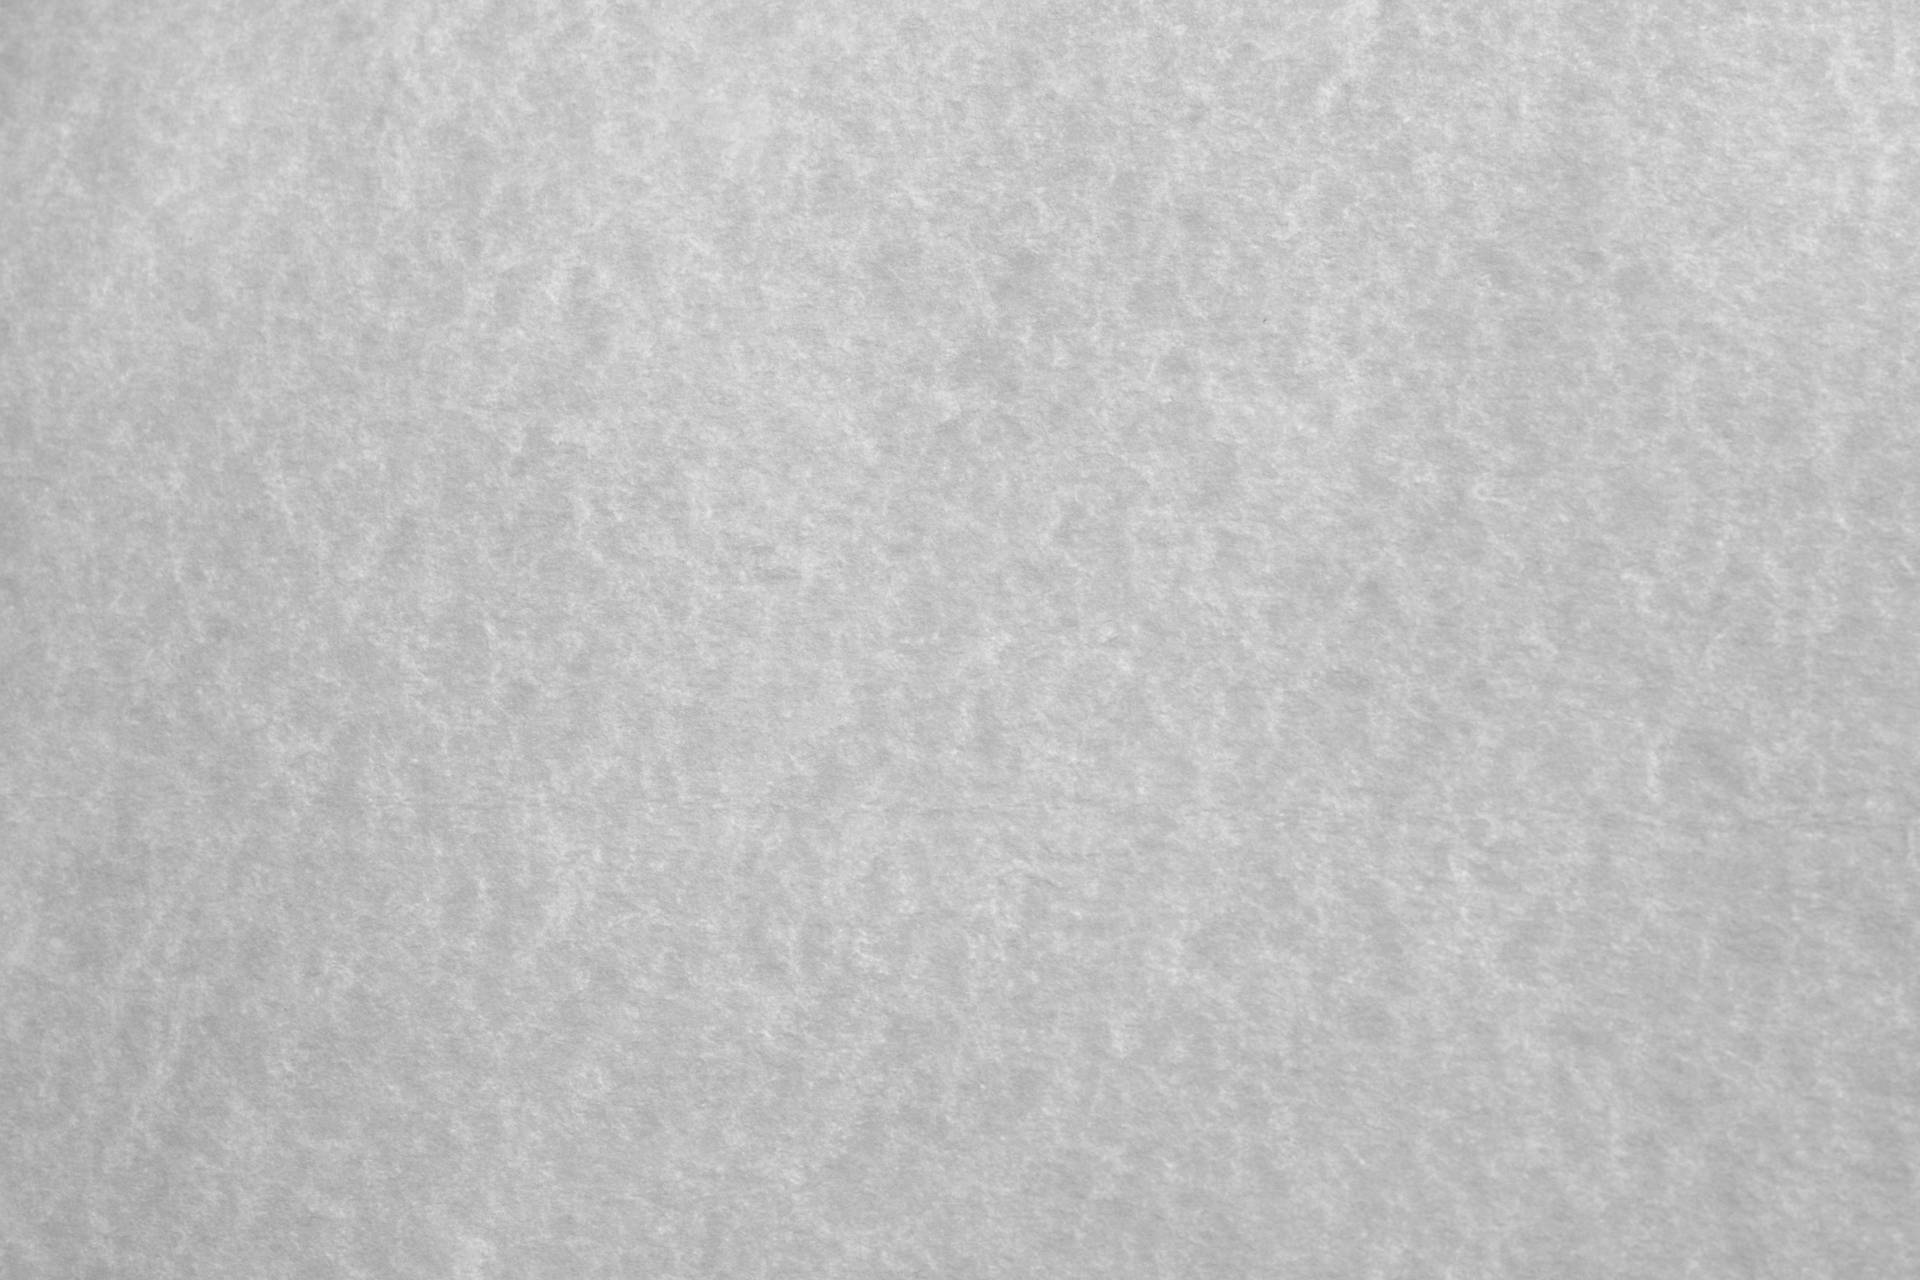 Gray 3888X2592 Wallpaper and Background Image